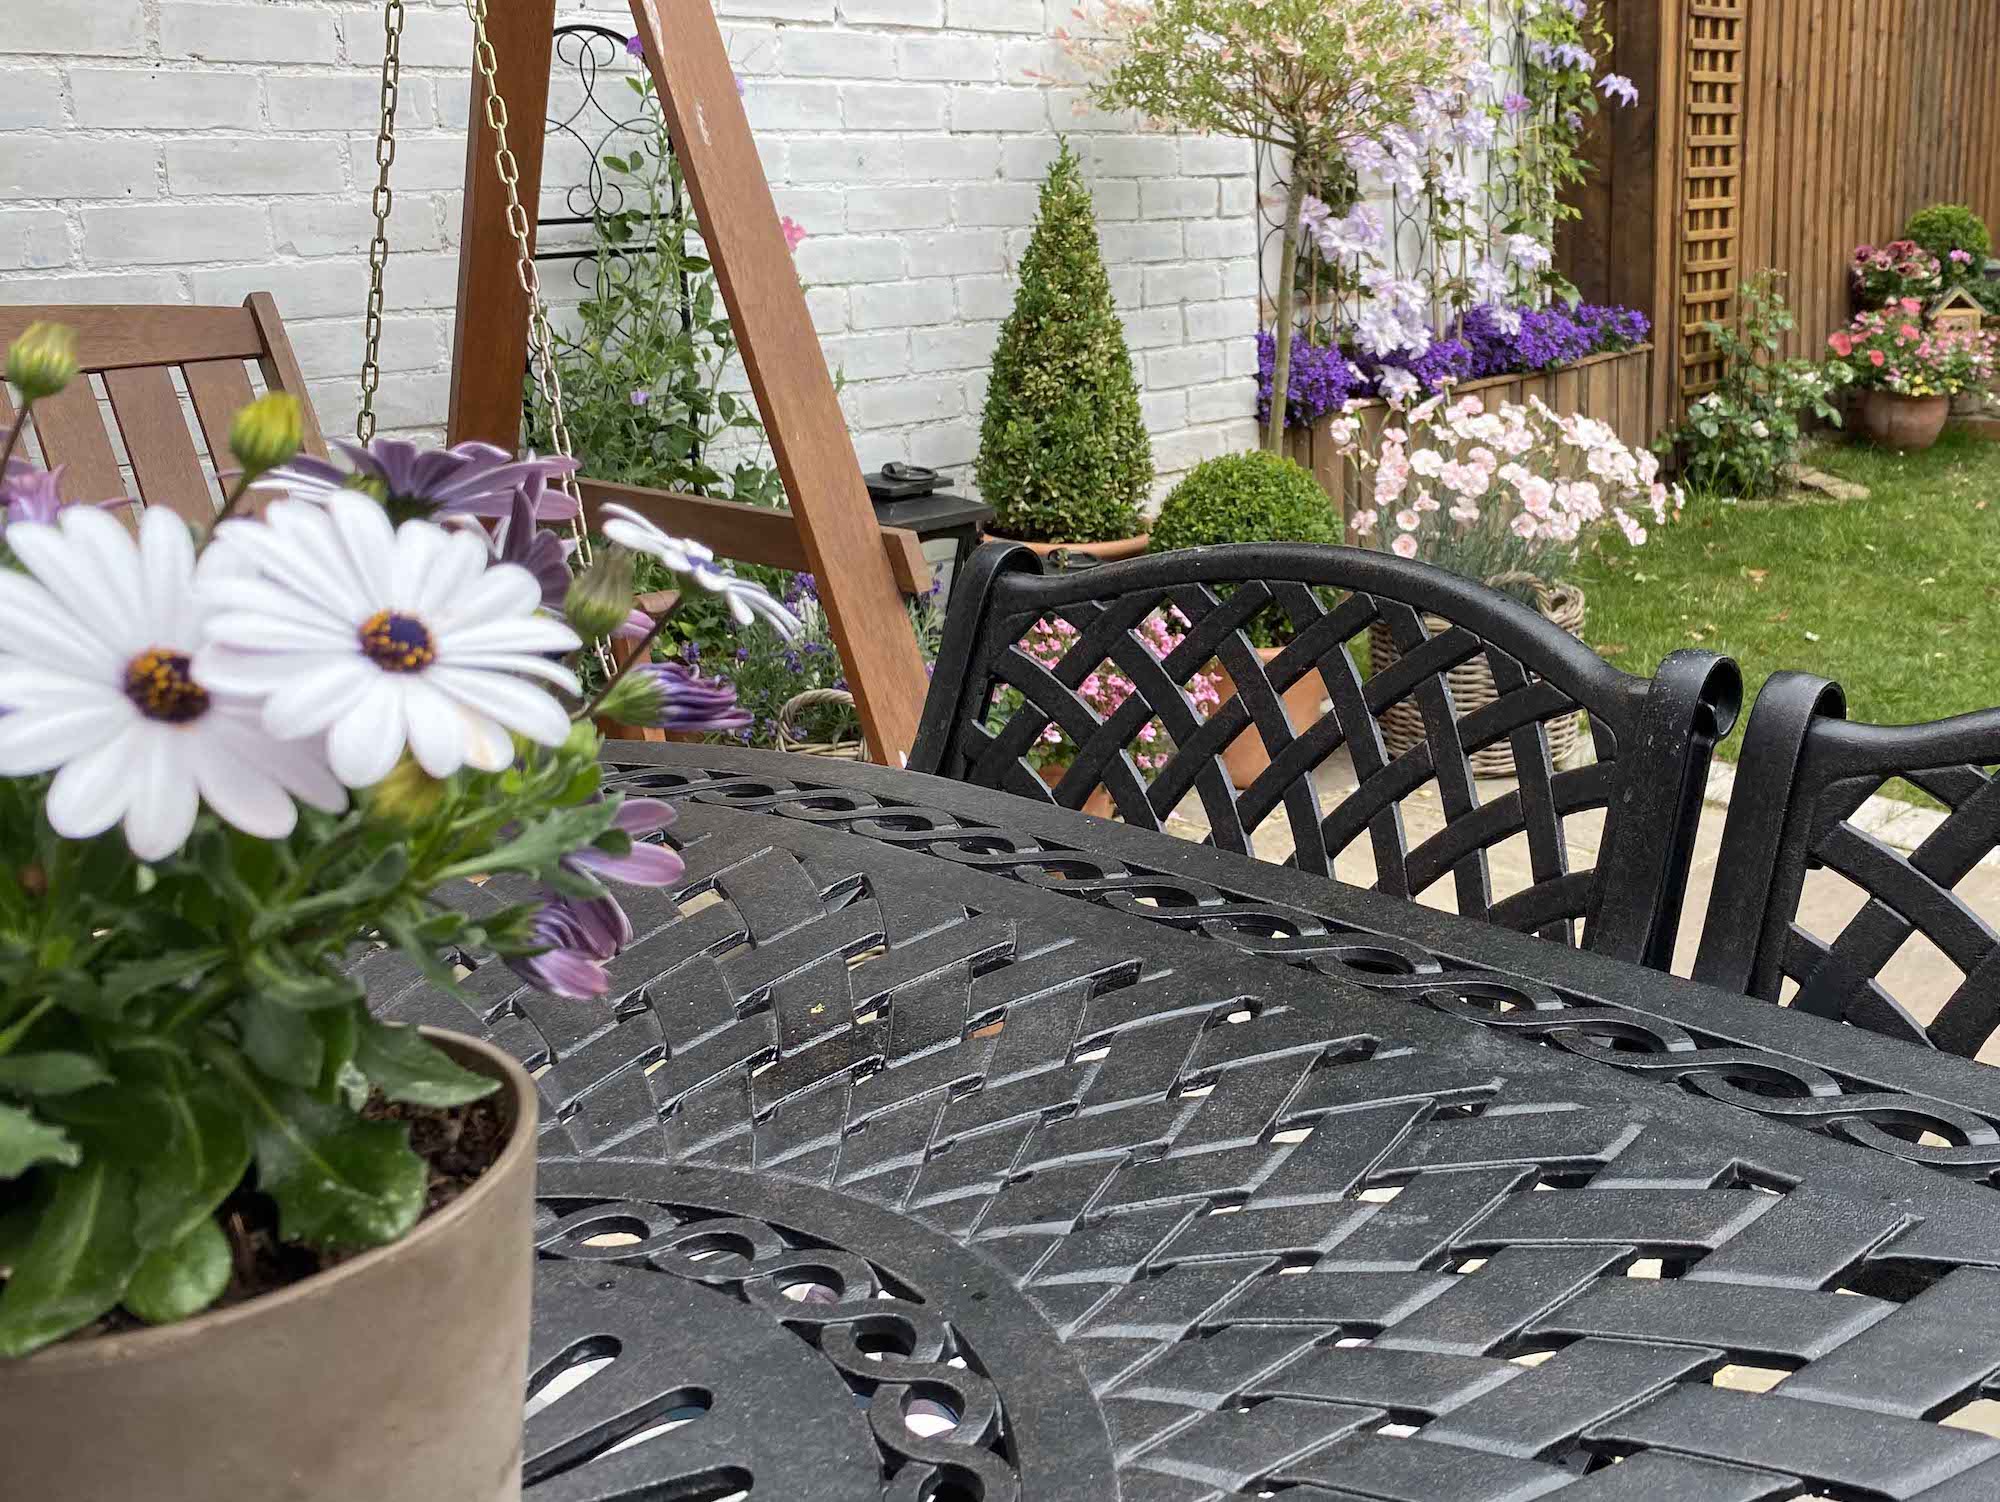 Can you recycle our garden furniture?